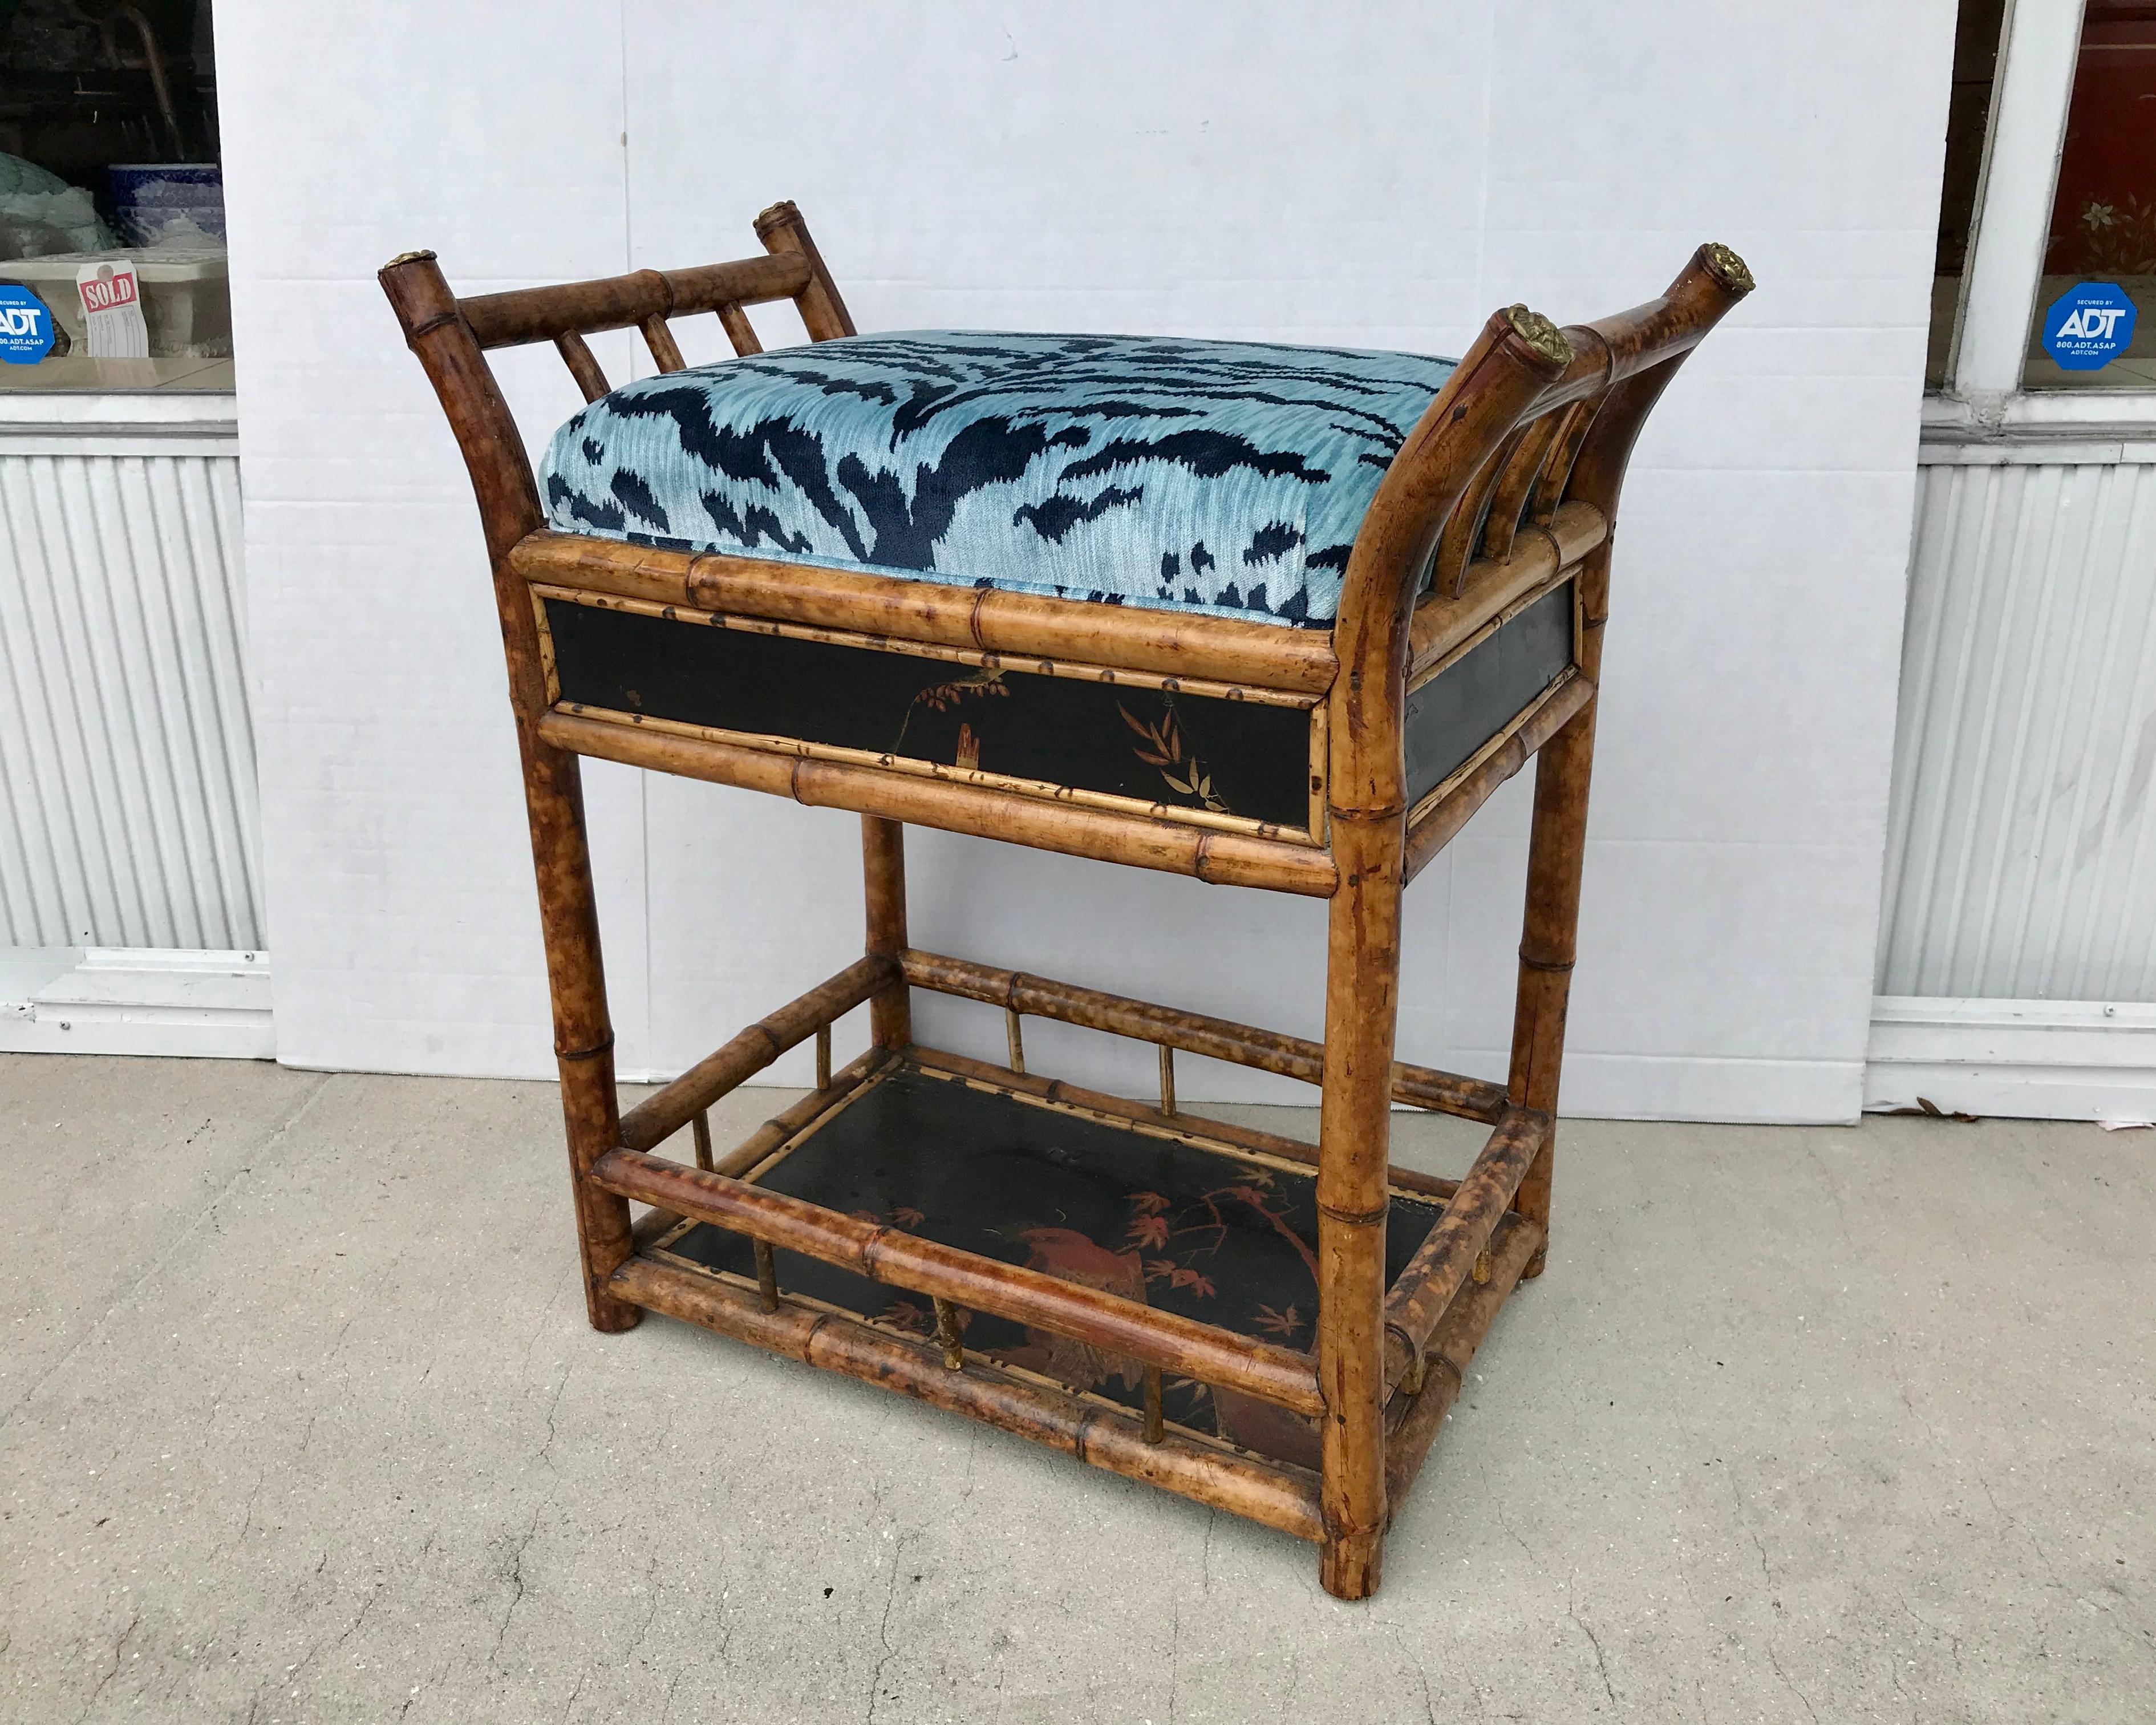 A superb Regency style bench with a chinoiserie lacquered base. 
The burnt bamboo bench is richly appointed with Luigi Bevilacqua
blue tiger cut velvet. This is an extremely rare form.